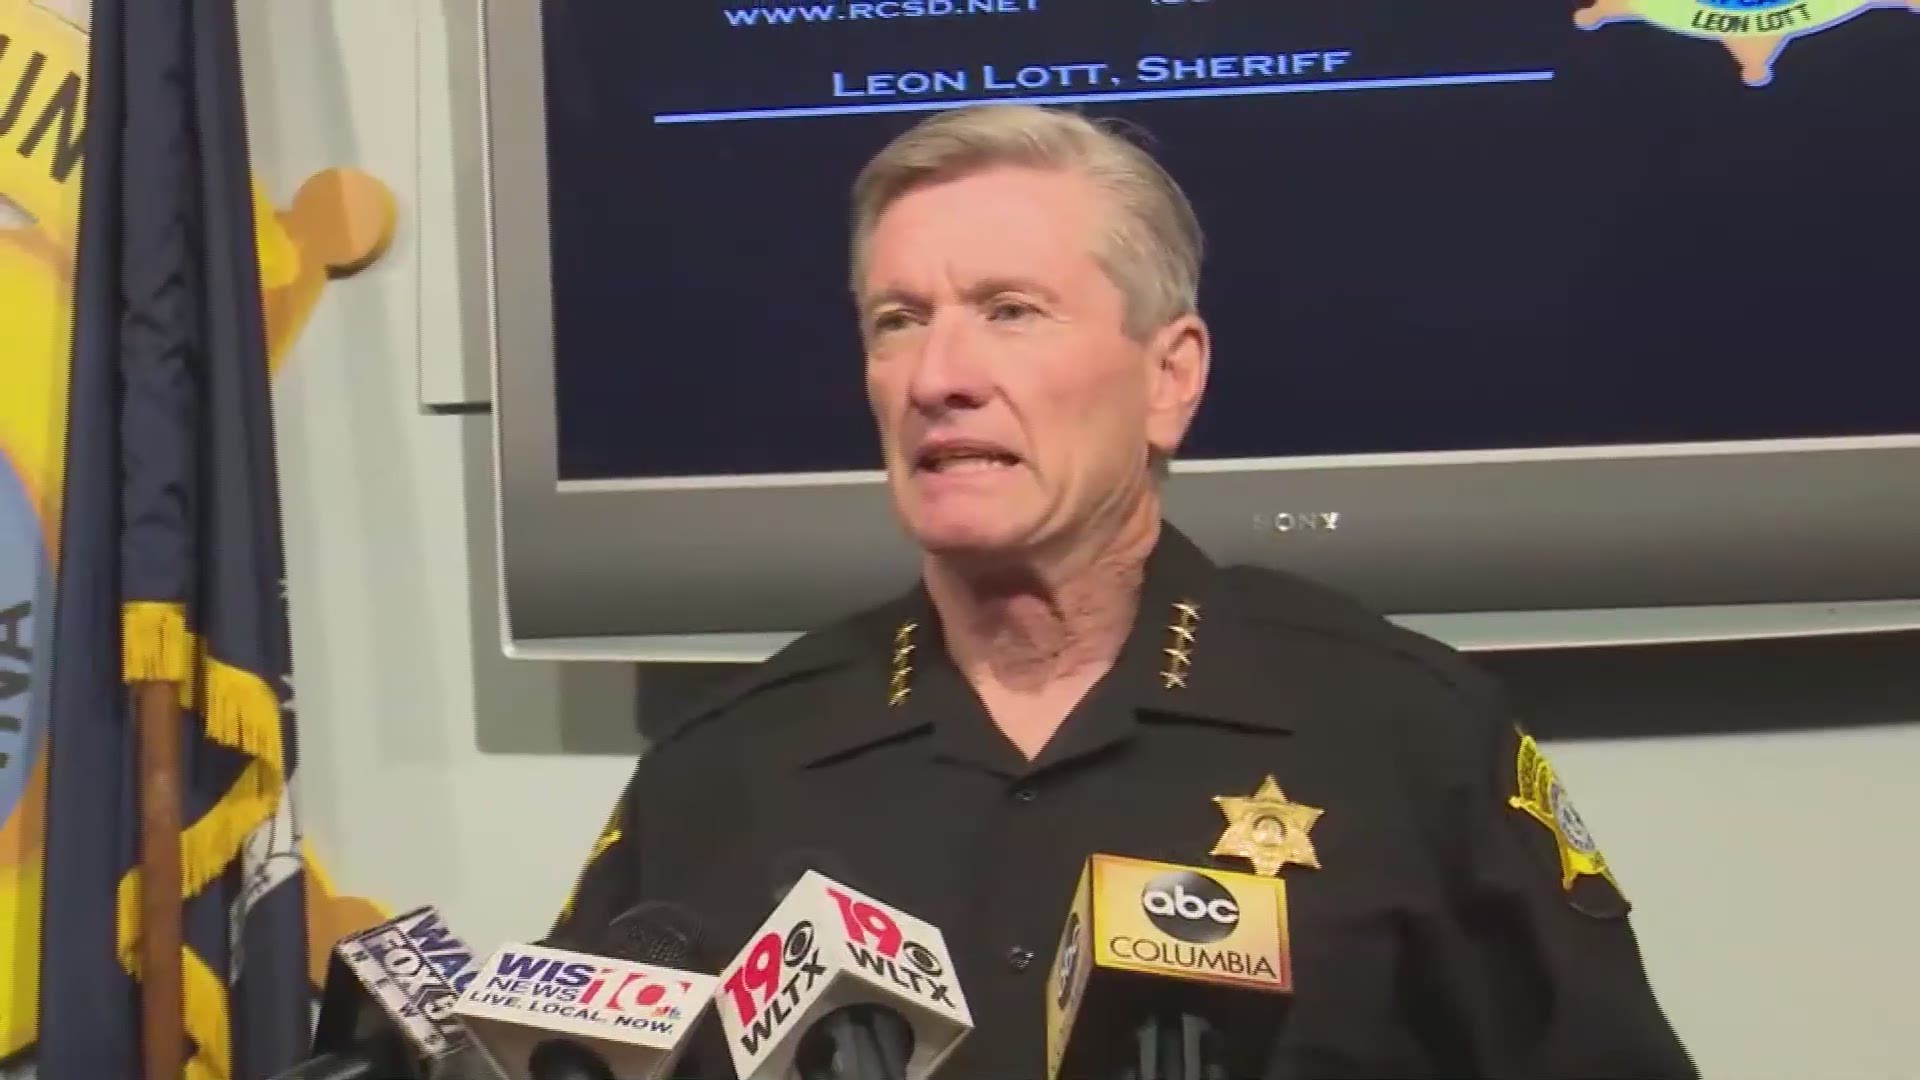 Sheriff Leon Lott says the investigating into a racist threats made by 16-year-old student remains open.